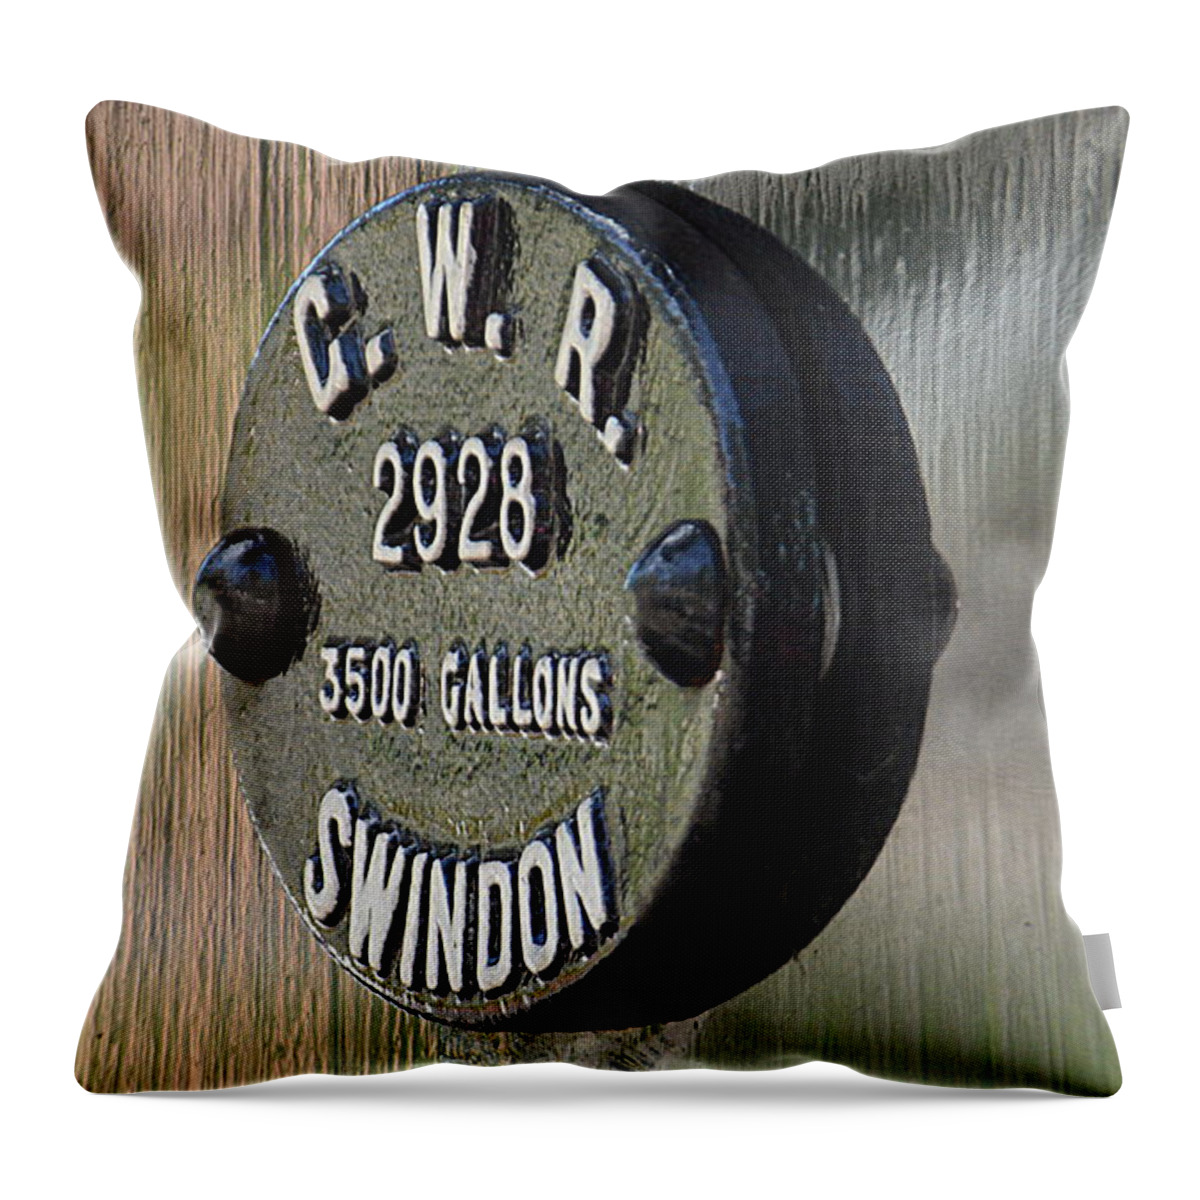 Gwr Engine Plate Throw Pillow featuring the photograph GWR Swindon by Andy Thompson